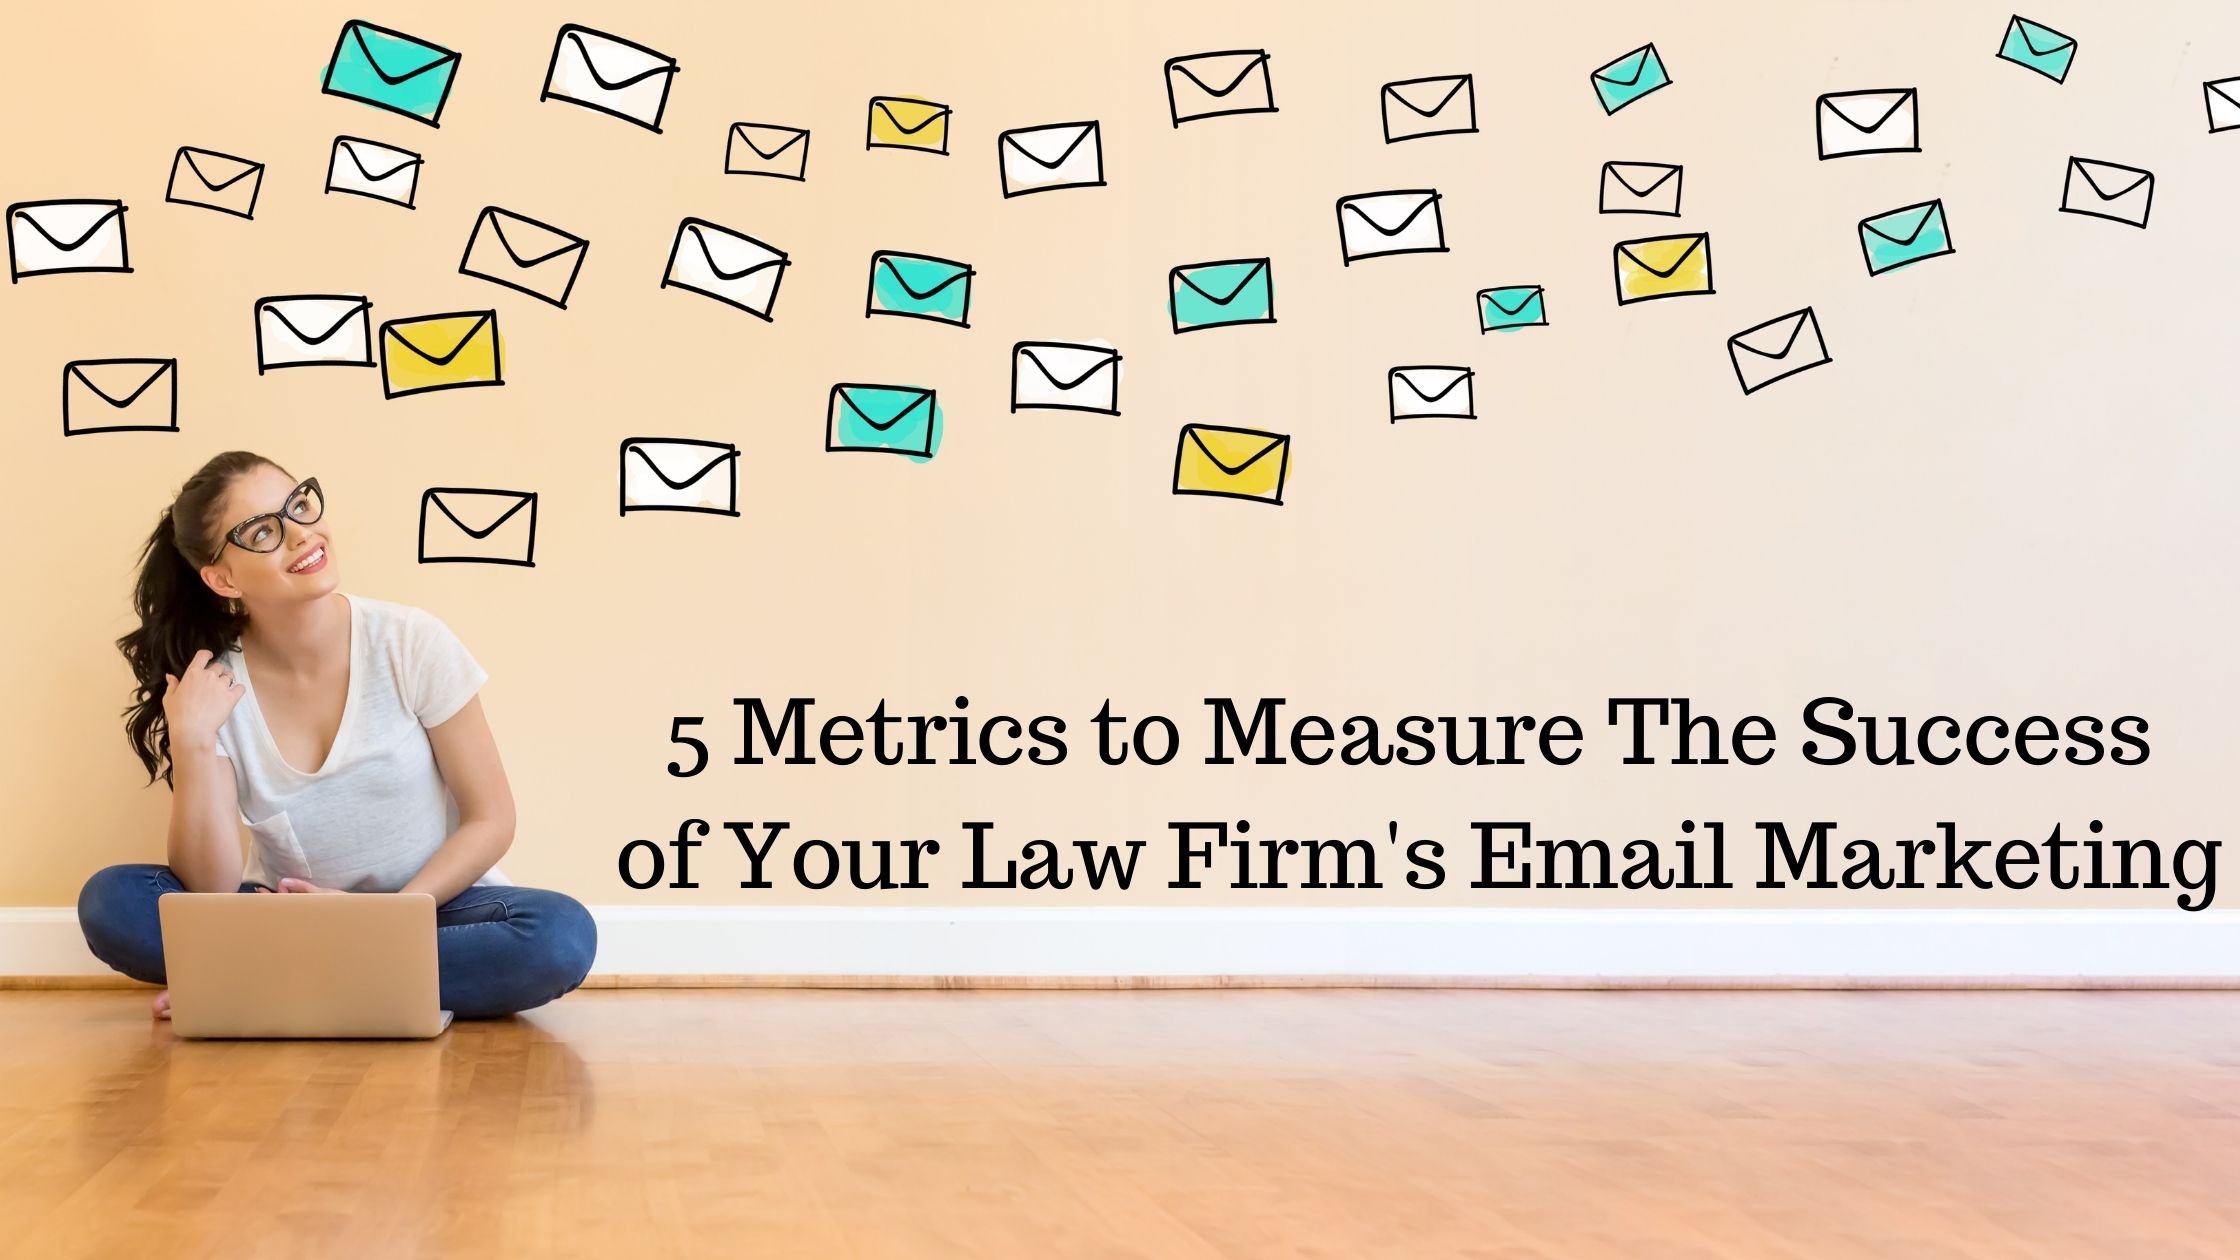 Blog banner image showing a woman sitting on a wooden floor with her laptop computer with emails illustrated on the wall above her and 5 metrics to measure the success of your law firm email marketing in text beside her.